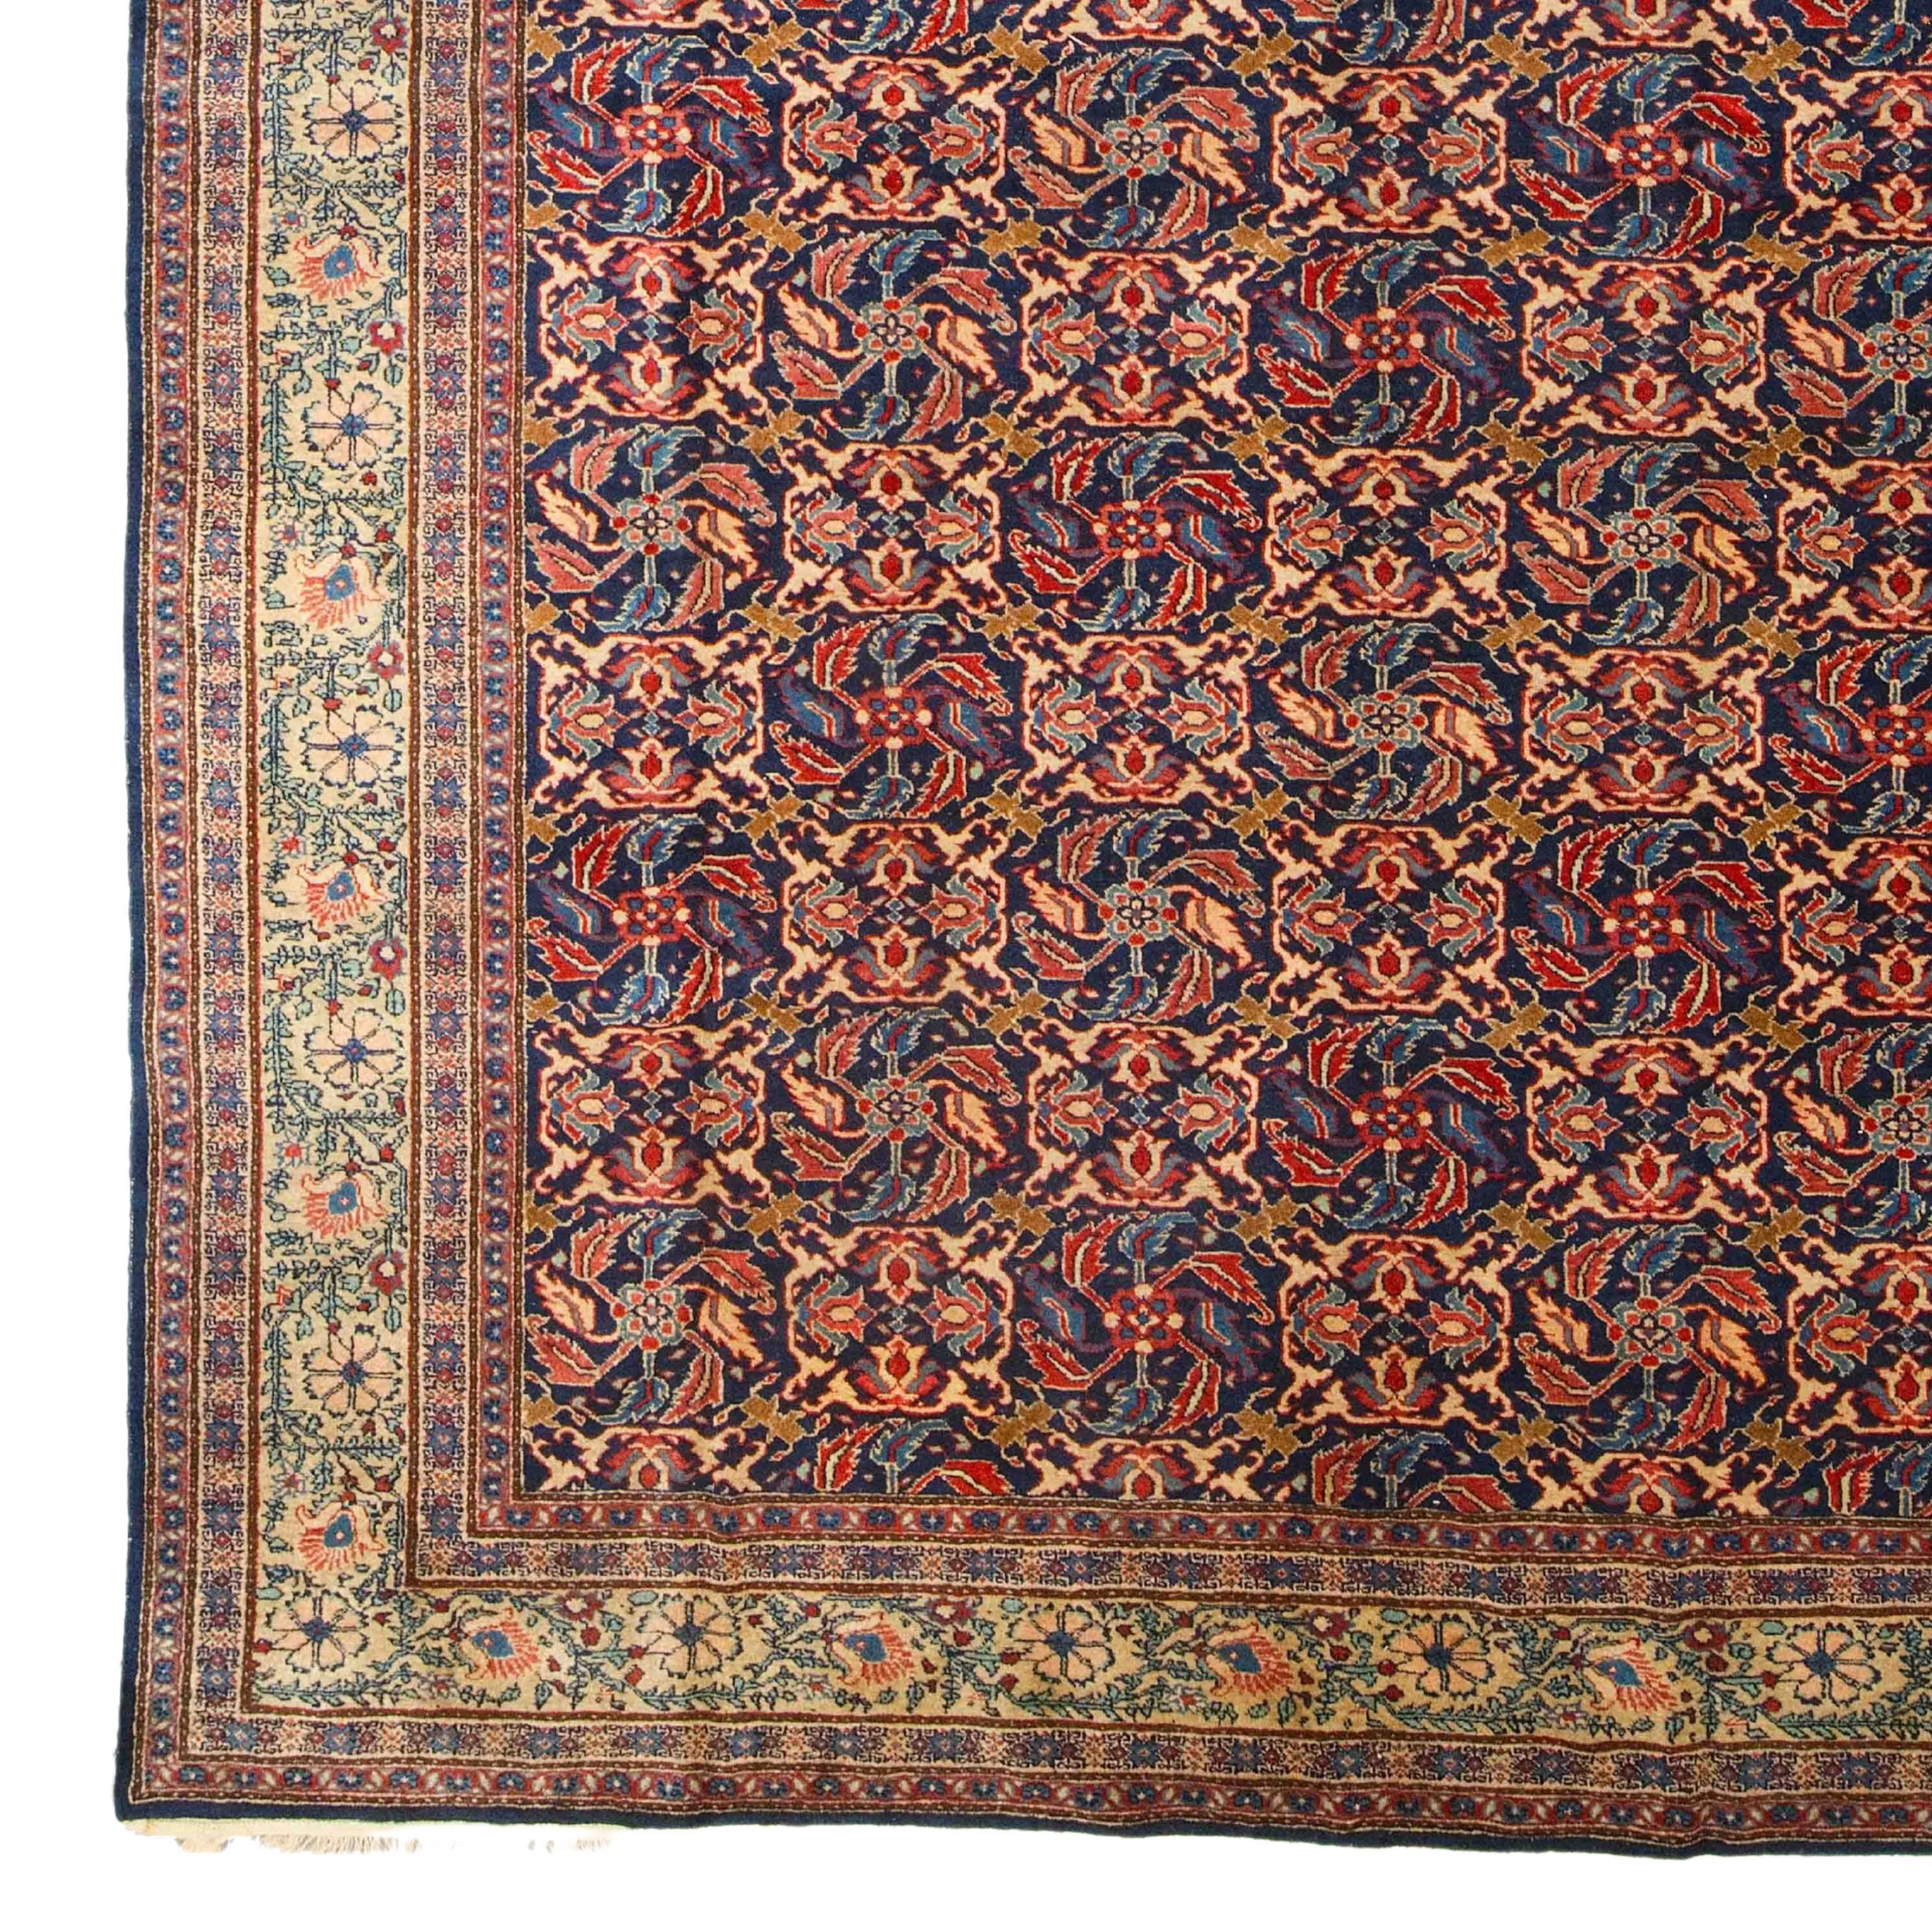 Antique Ferahan Carpet - Late 19th Century Ferahan Carpet in Good Condition 260 x 344cm (8,53 x 11,28 ft)

Ferahan carpets are usually made with the asymmetrical knot on a cotton foundation. Their pattern, colouring, and sometimes extremely large